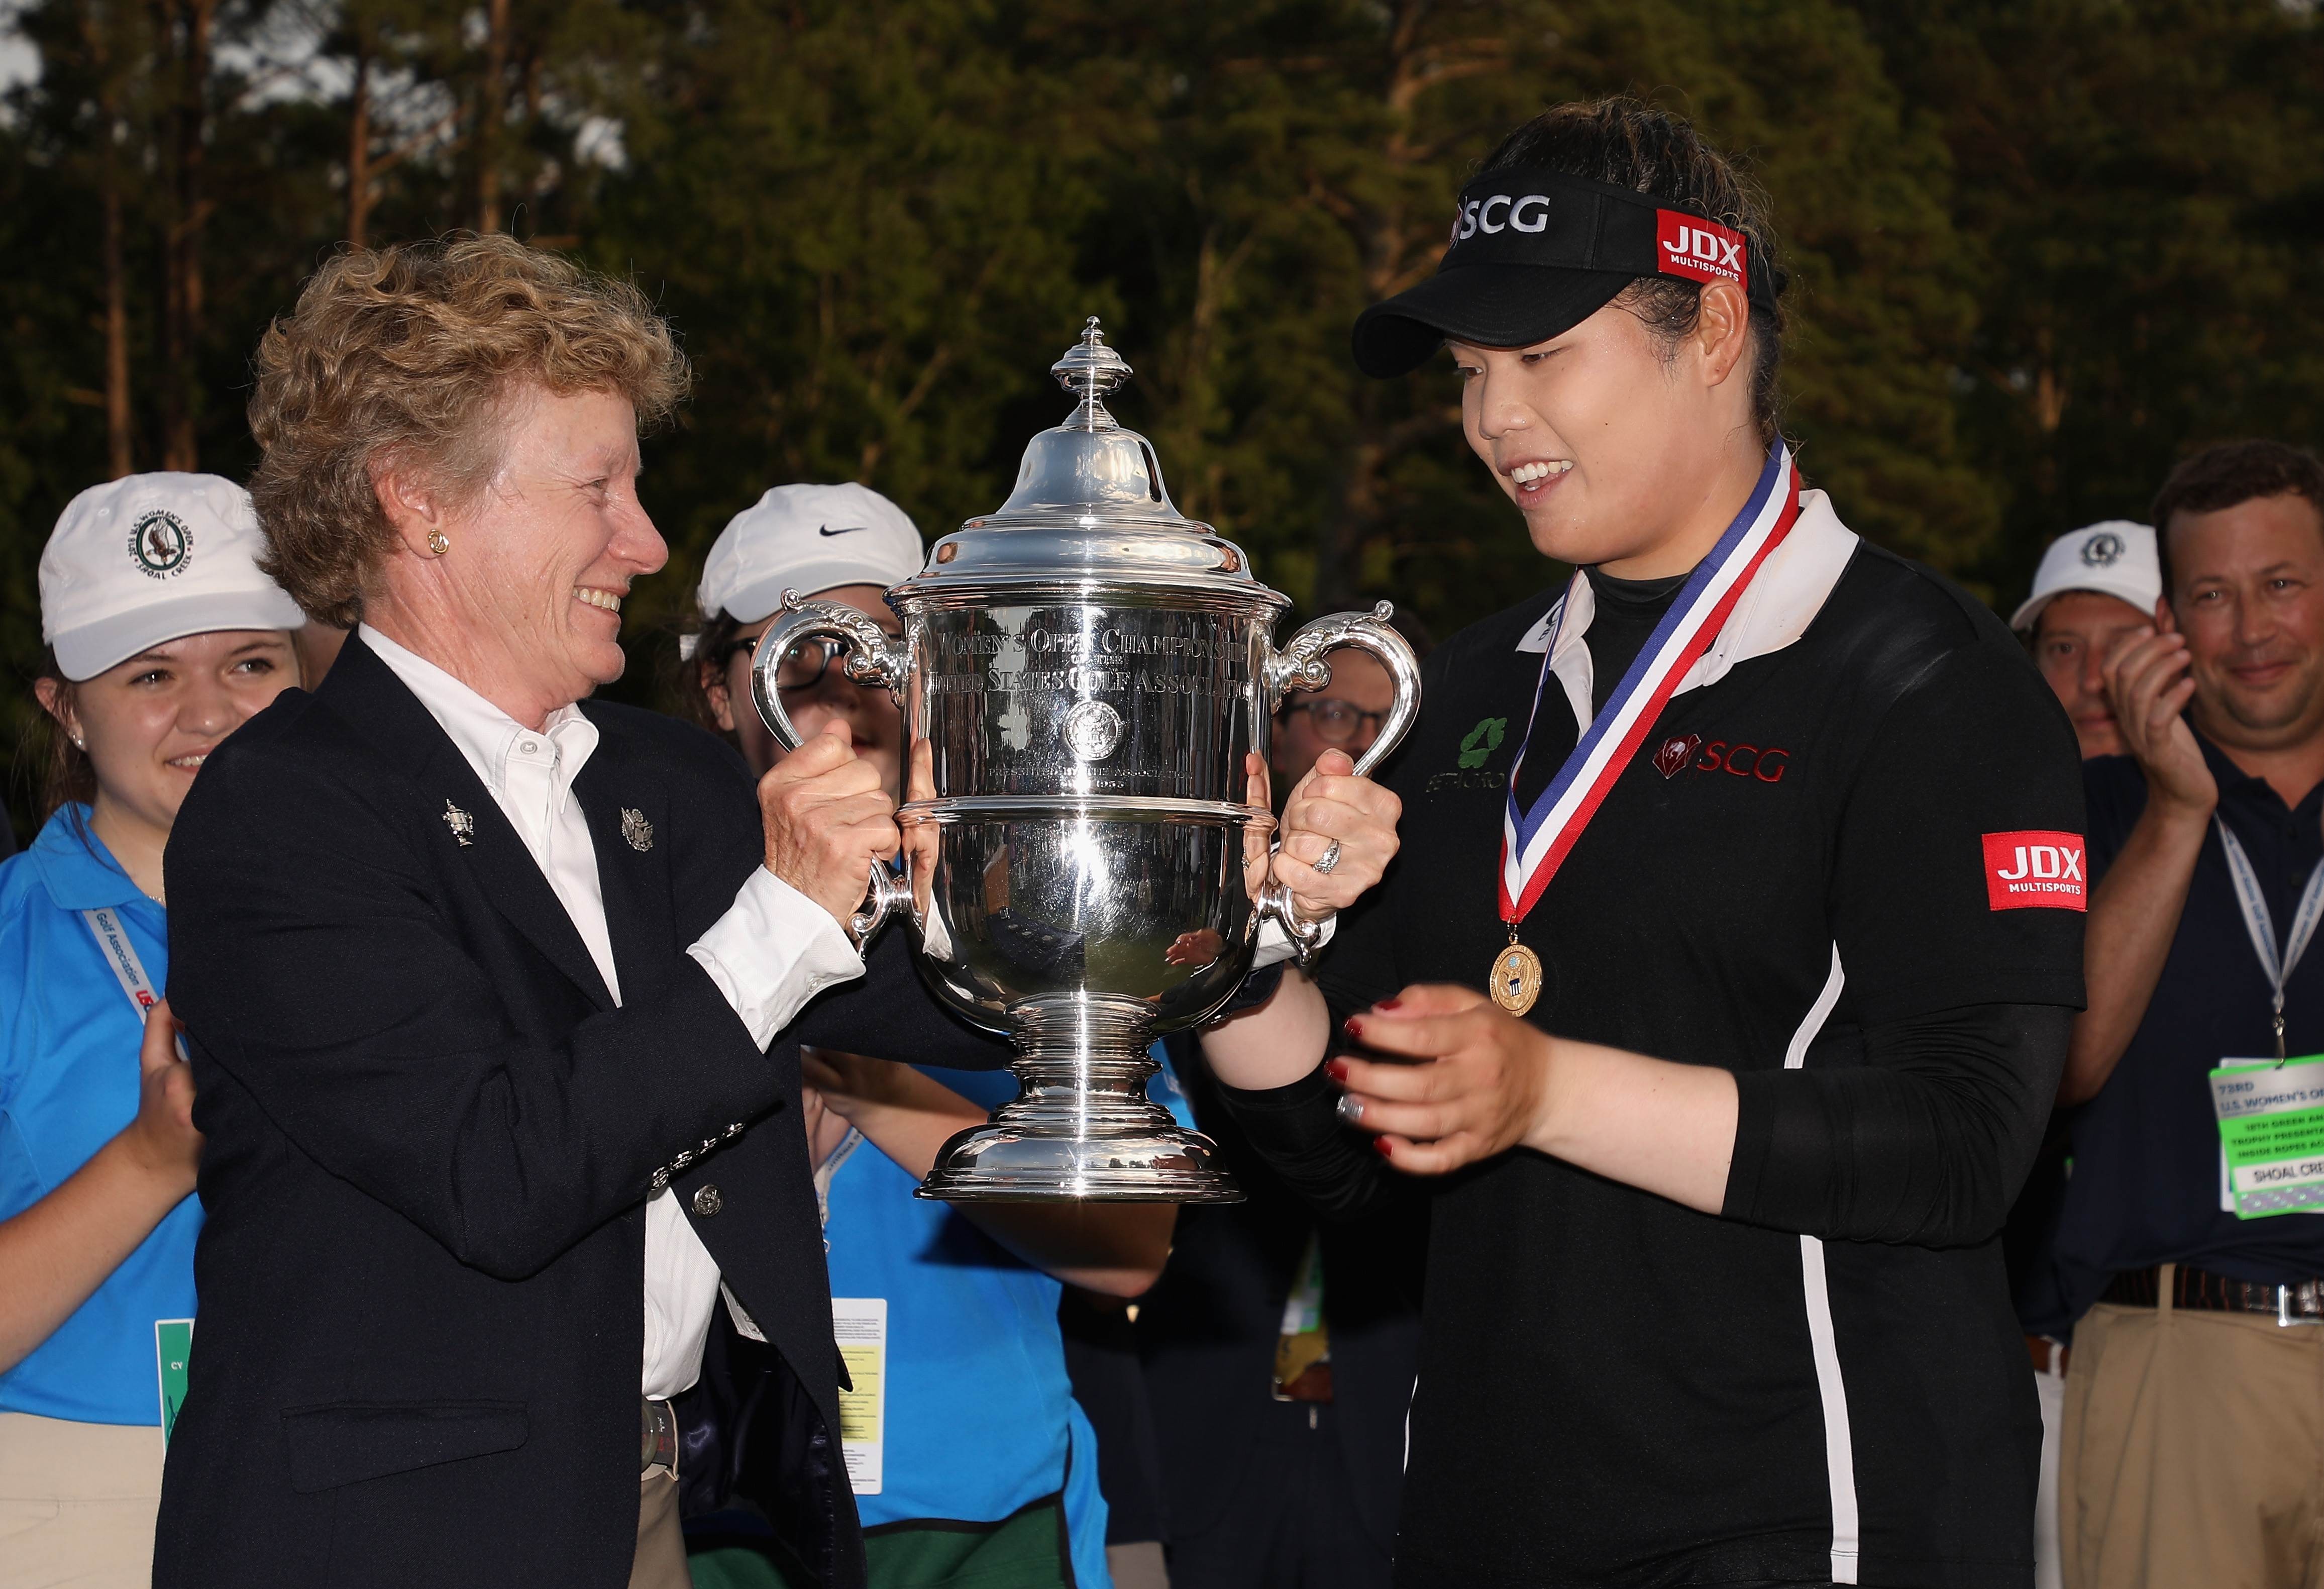 Ariya Jutanugarn of Thailand is awarded the 2018 US Women’s Open trophy after winning in a play-off. Photo: AFP